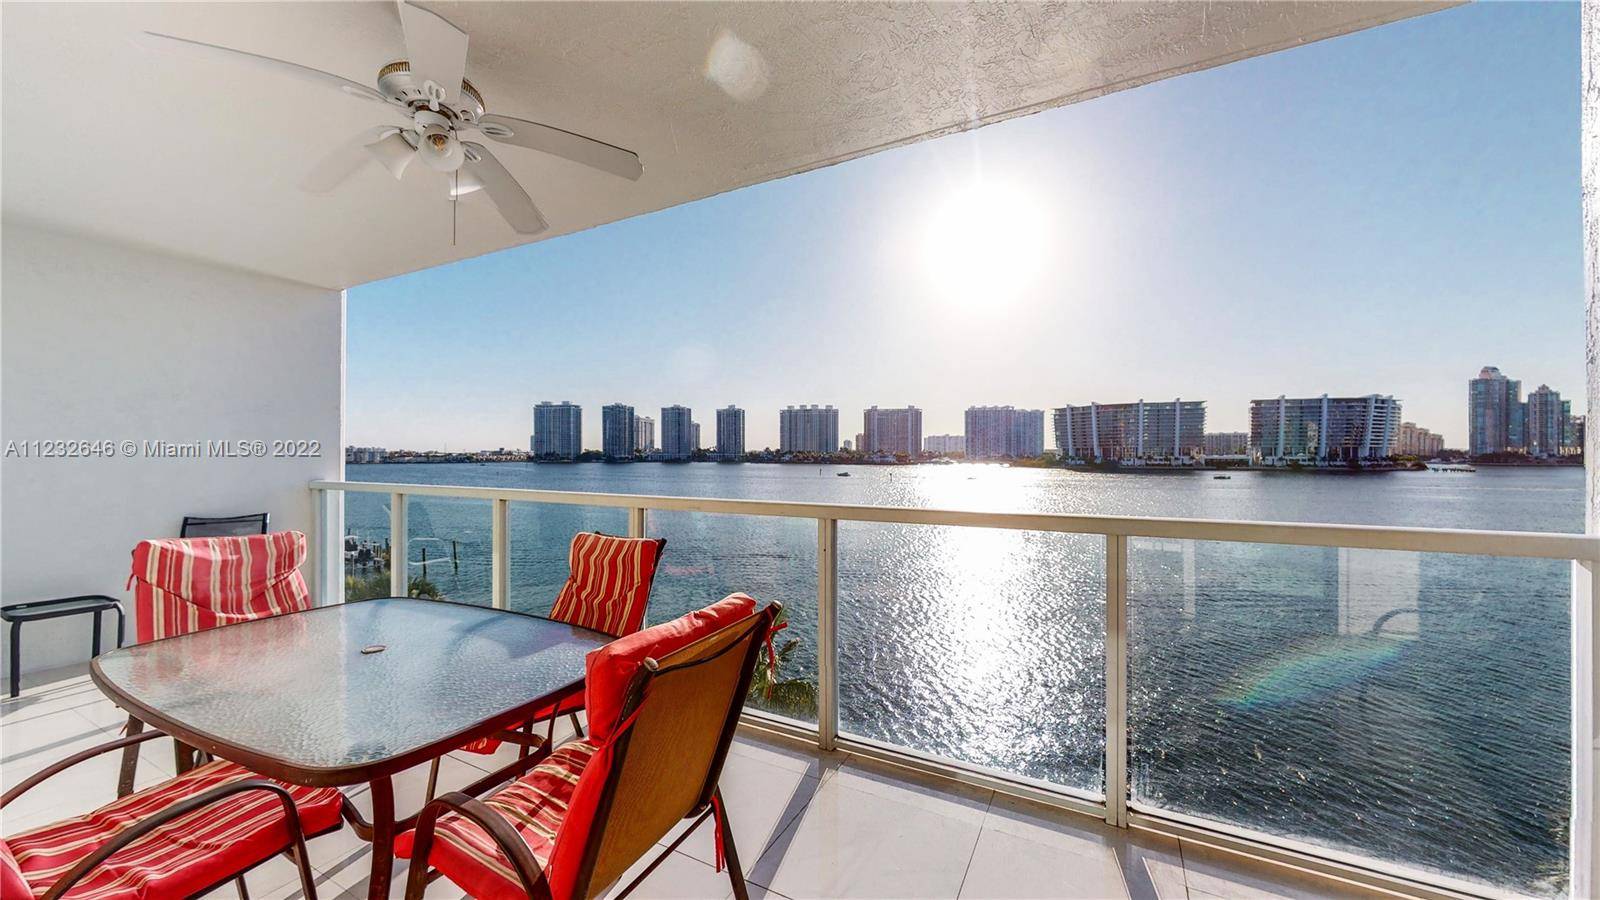 BEAUTIFUL 2 BEDROOM 2 BATHROOM FULLY FURNISHED APARTMENT WITH GORGEOUS INTERCOSTAL VIEW.